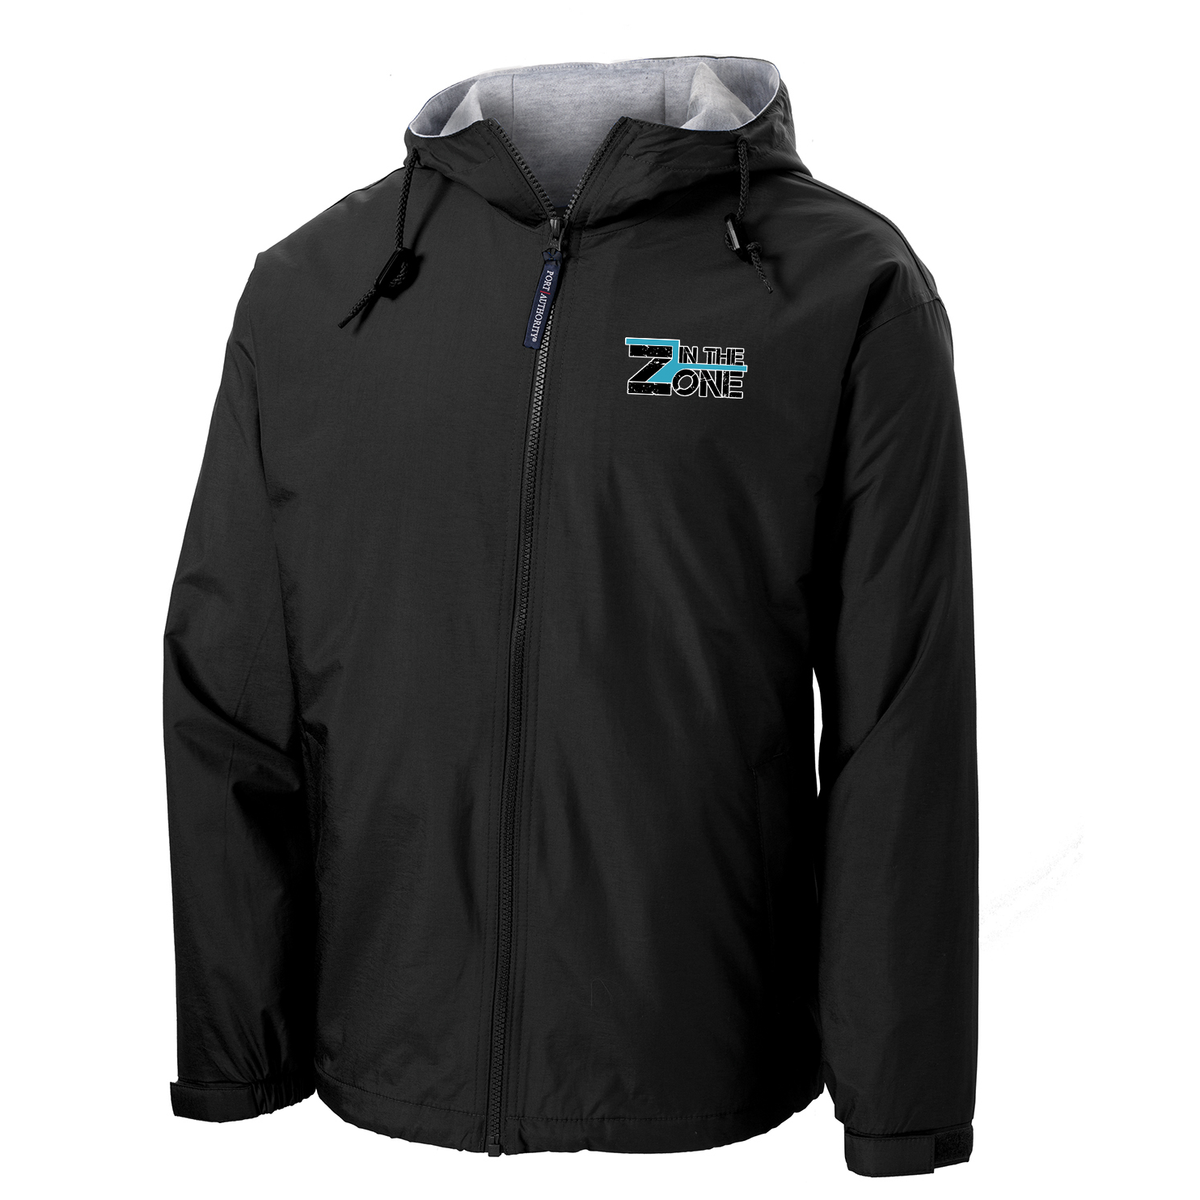 The Zone Hooded Jacket